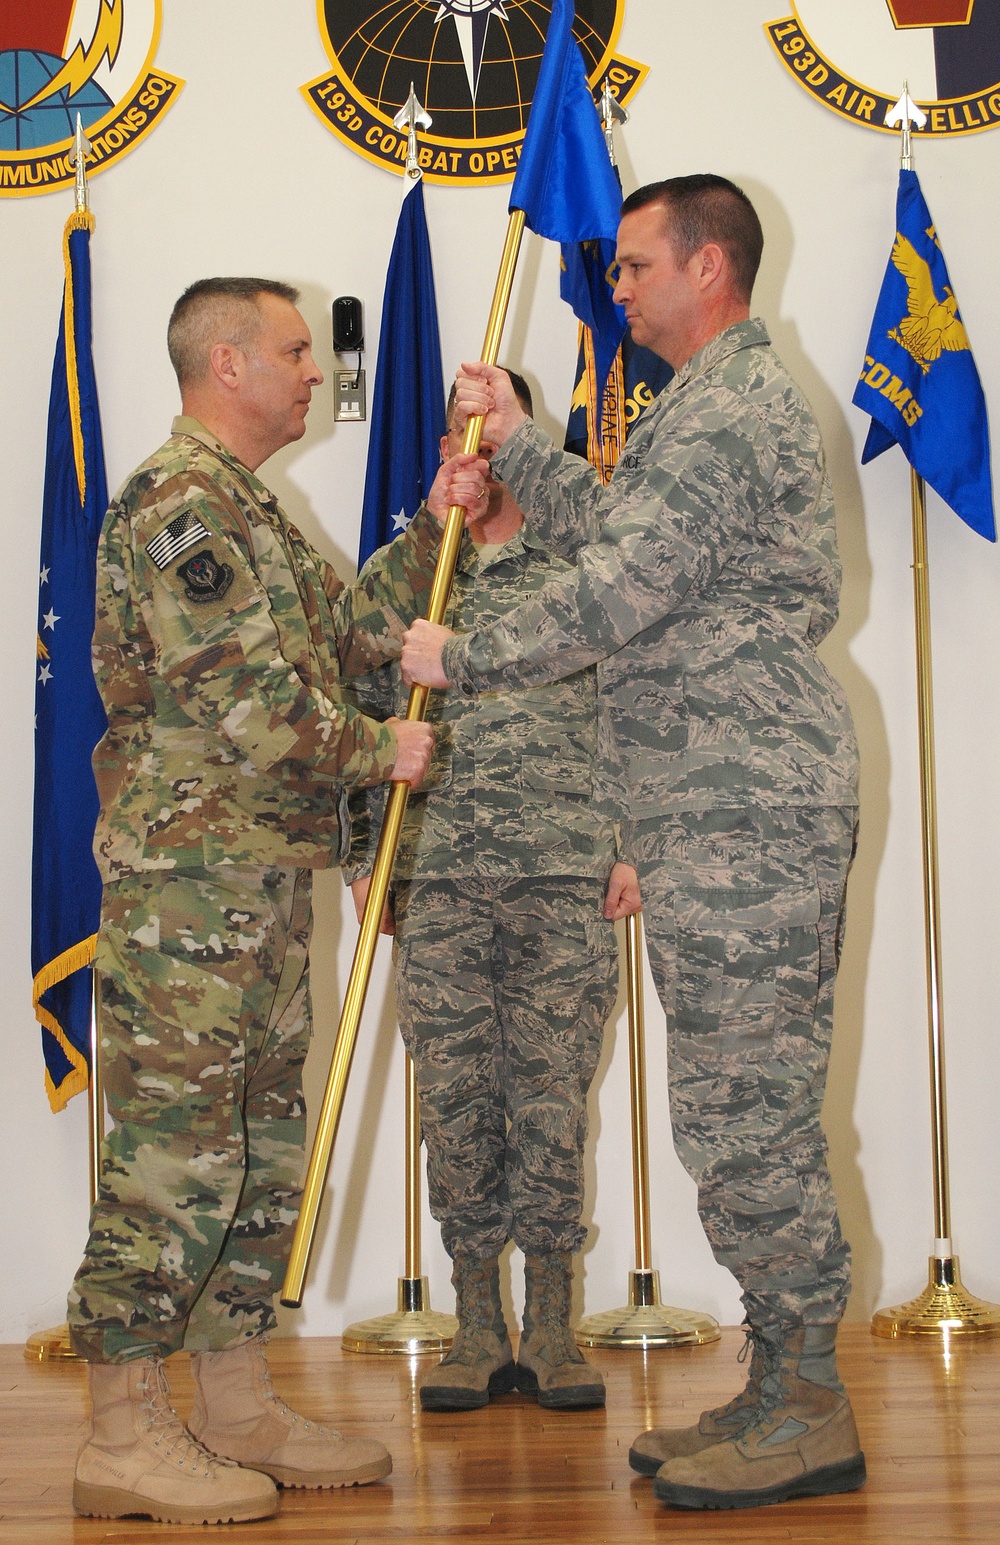 New commander appointed at combat operations squadron